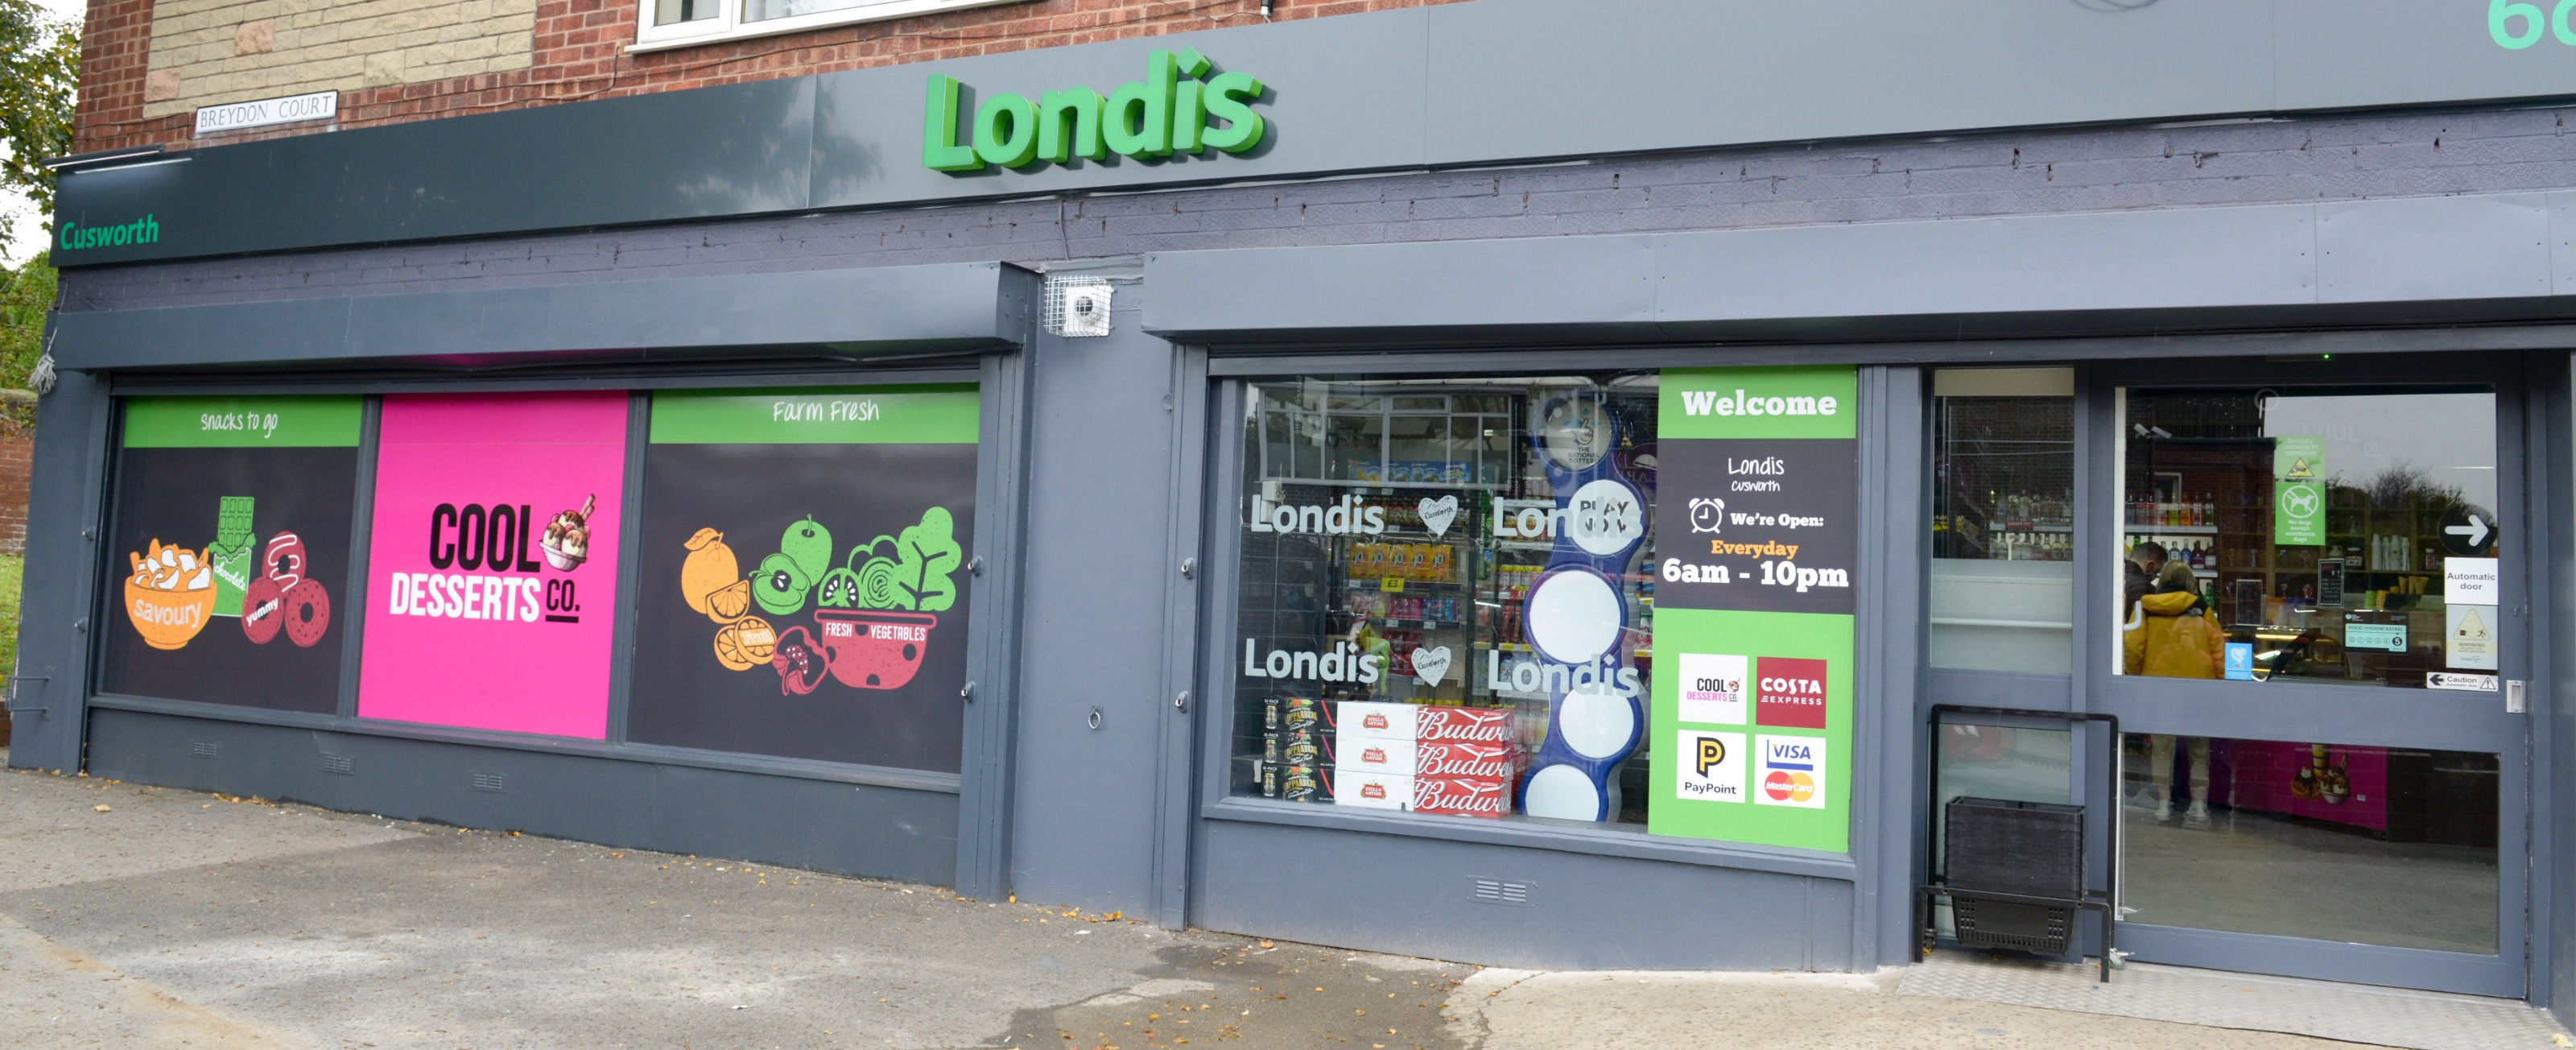 Why Londis?